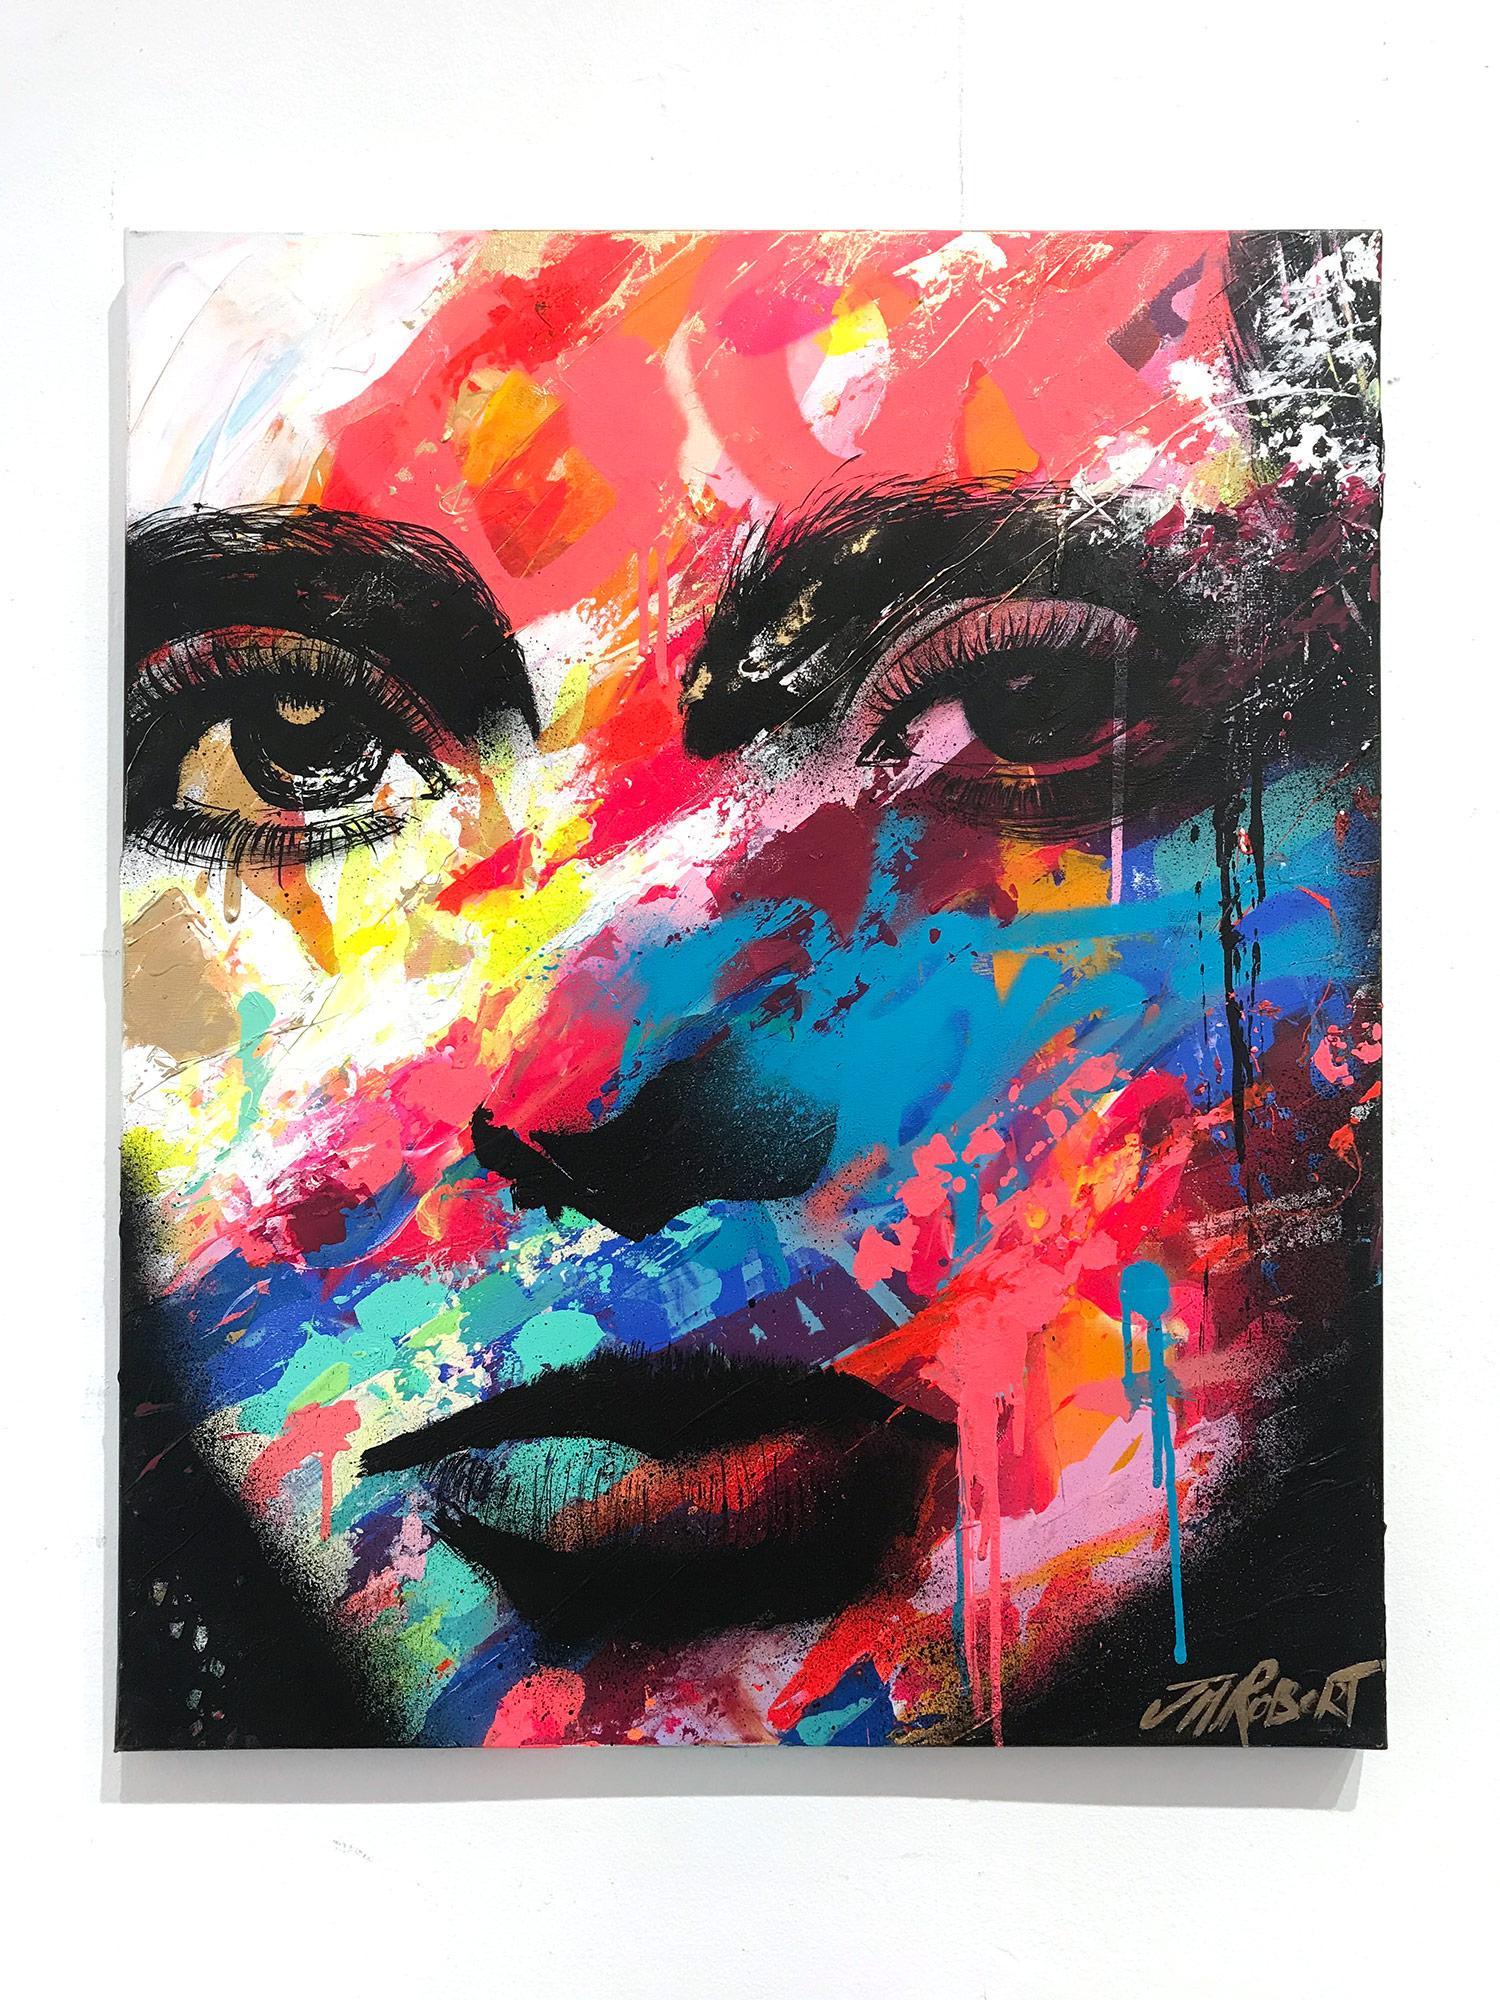 “Elle Fait Face” She Faces, Colorful, Abstract Street Art, French Artist 4